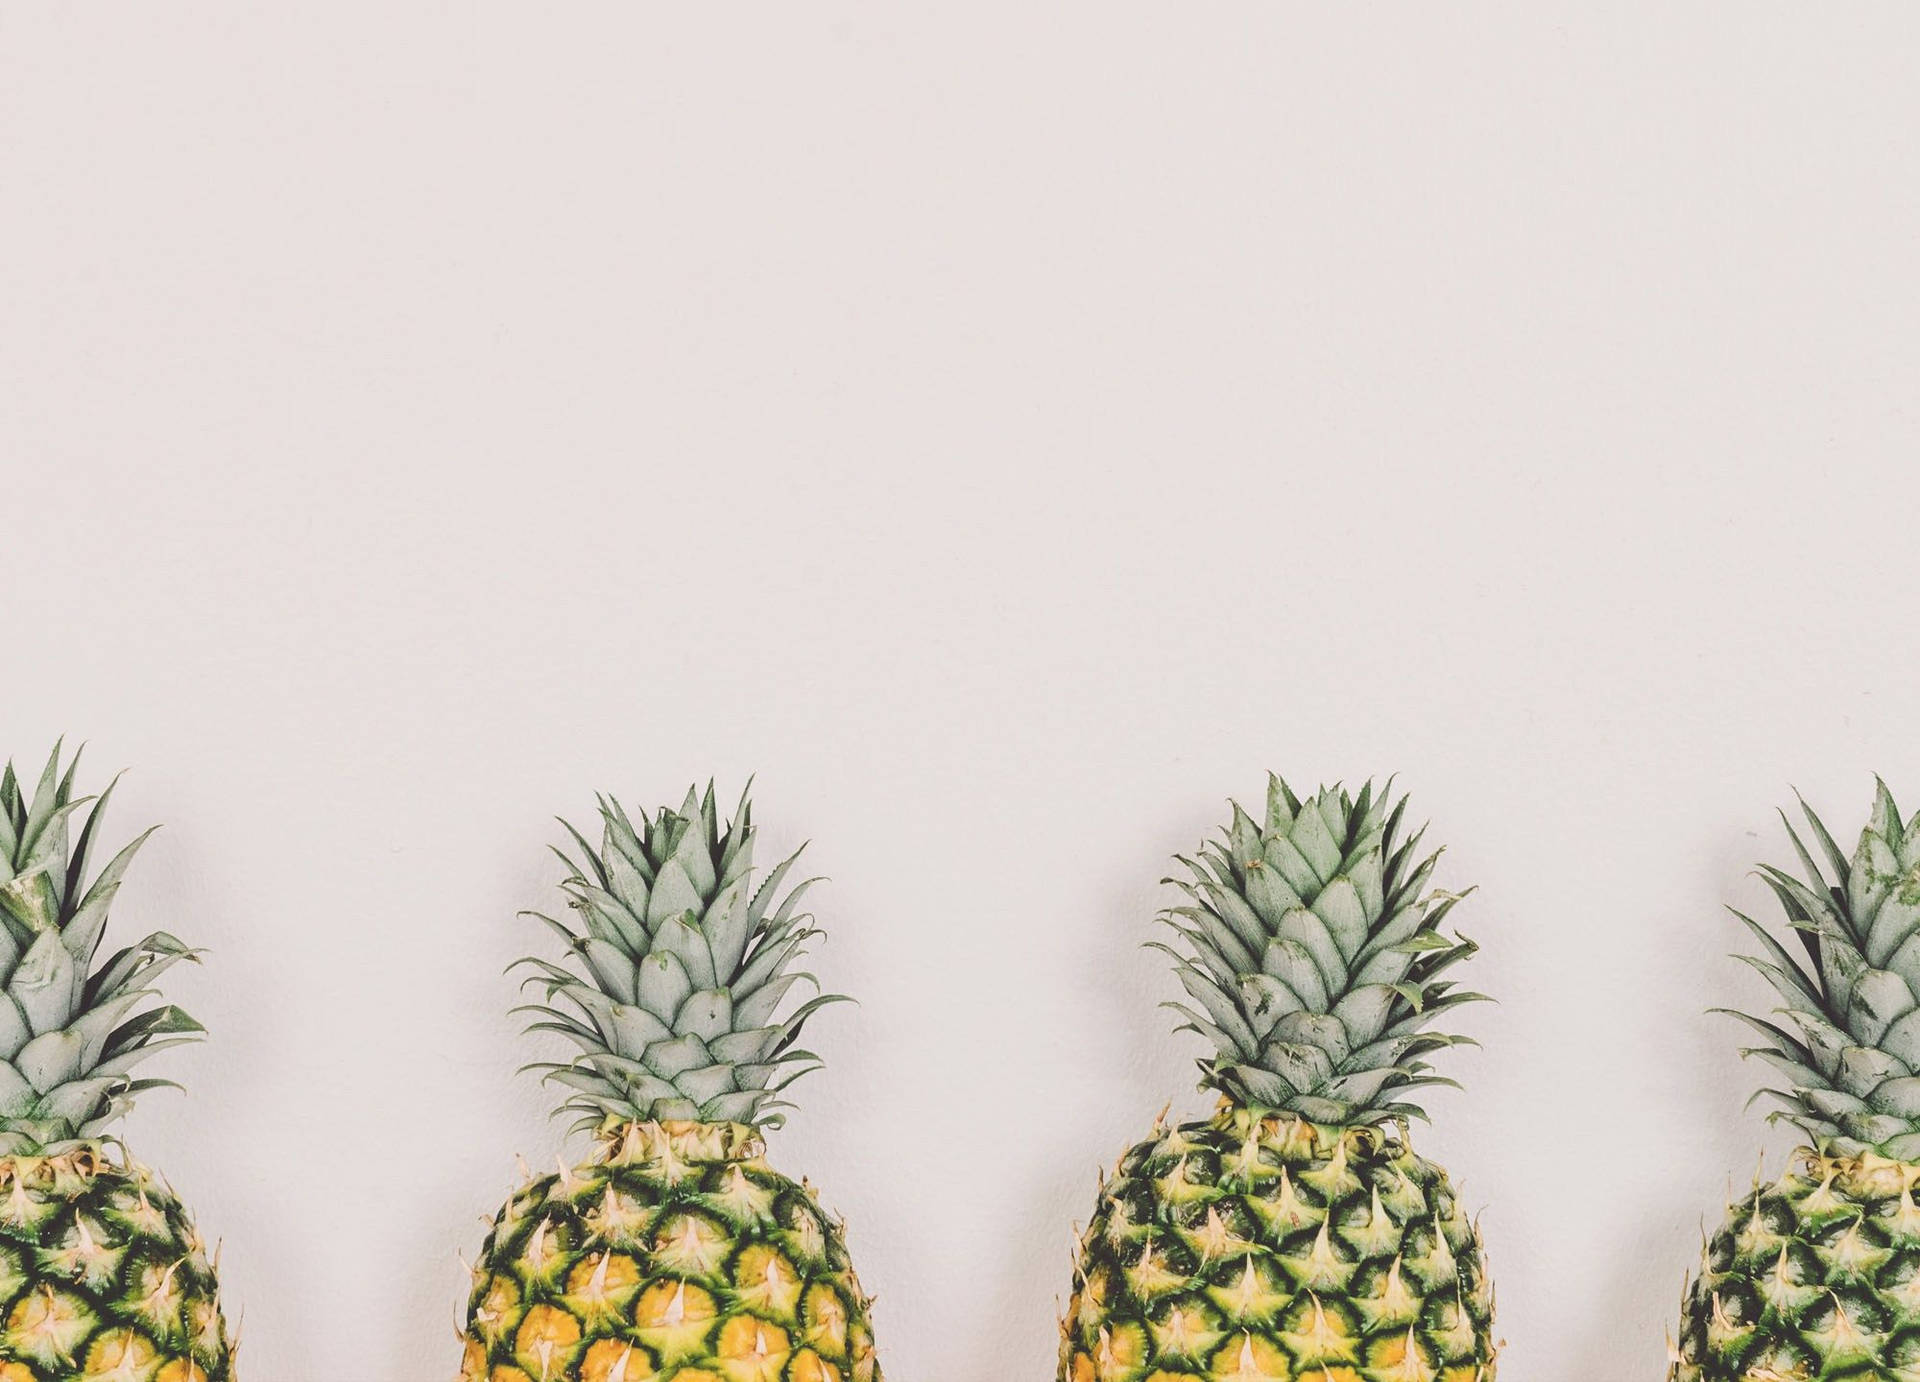 An Array Of Pineapples Of Different Sizes, Shapes, And Colors All Lined Up Side By Side. Background